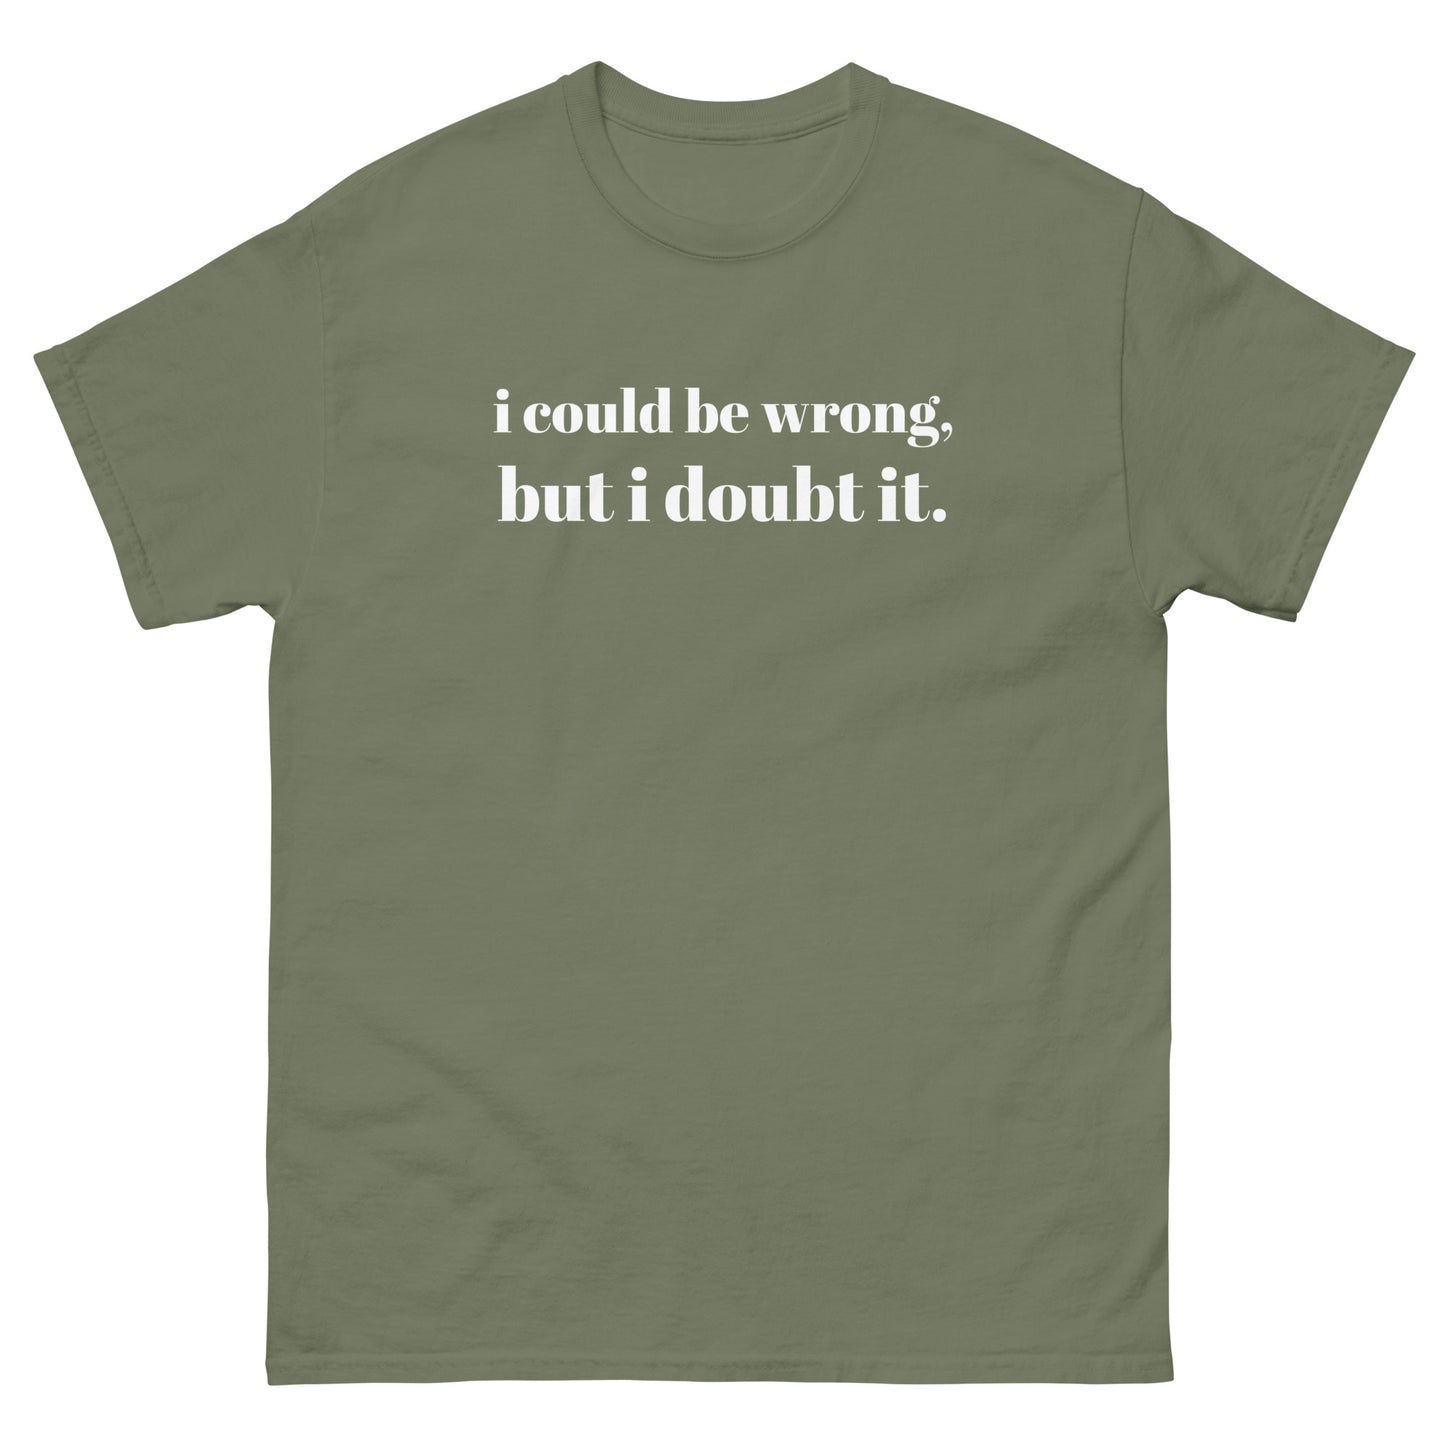 i could be wrong, but i doubt it Tshirt  - Unisex